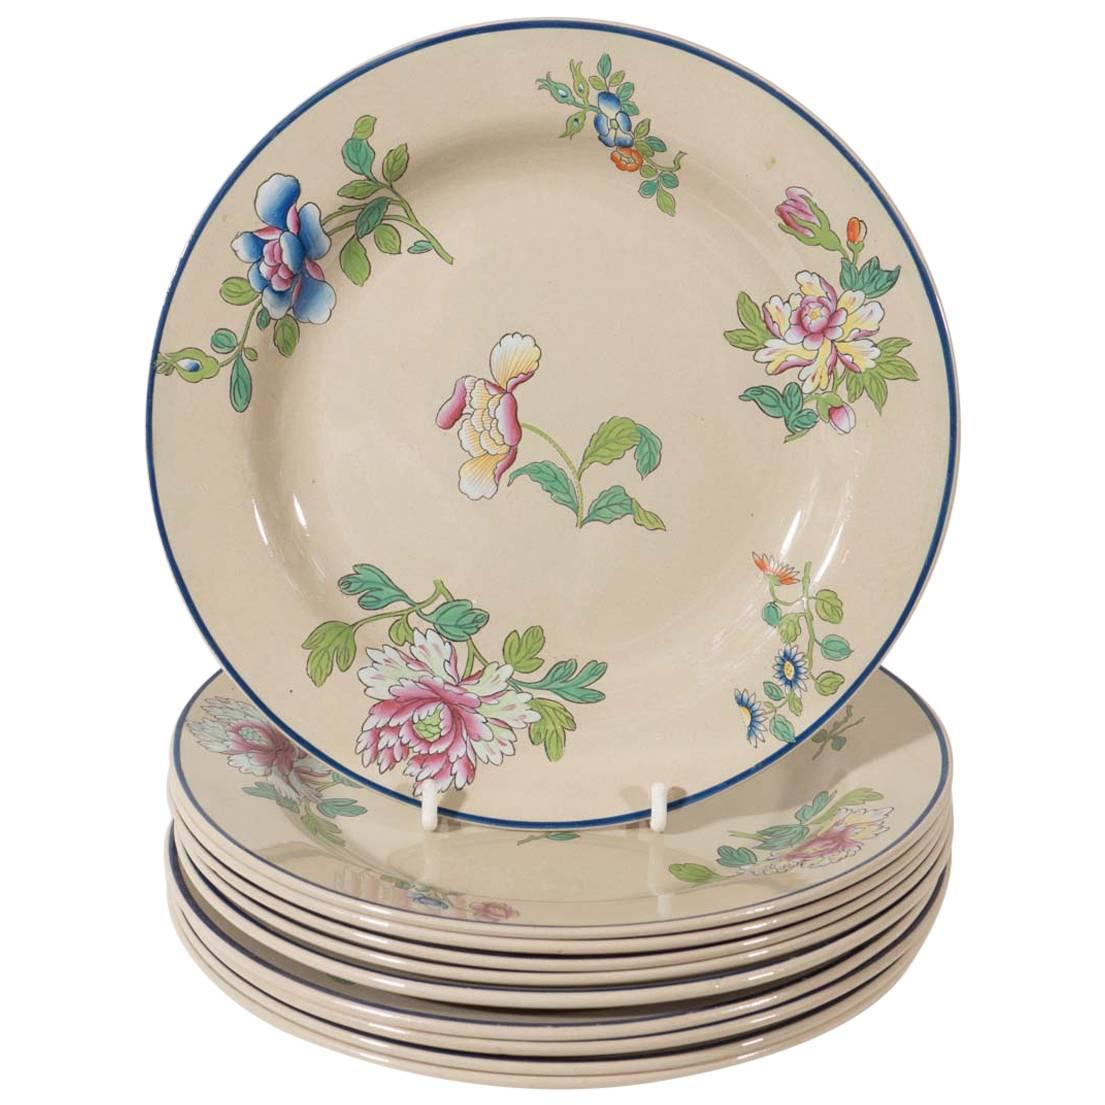 Set of Ten Wedgwood Drabware Dishes Painted with Enamel Flowers